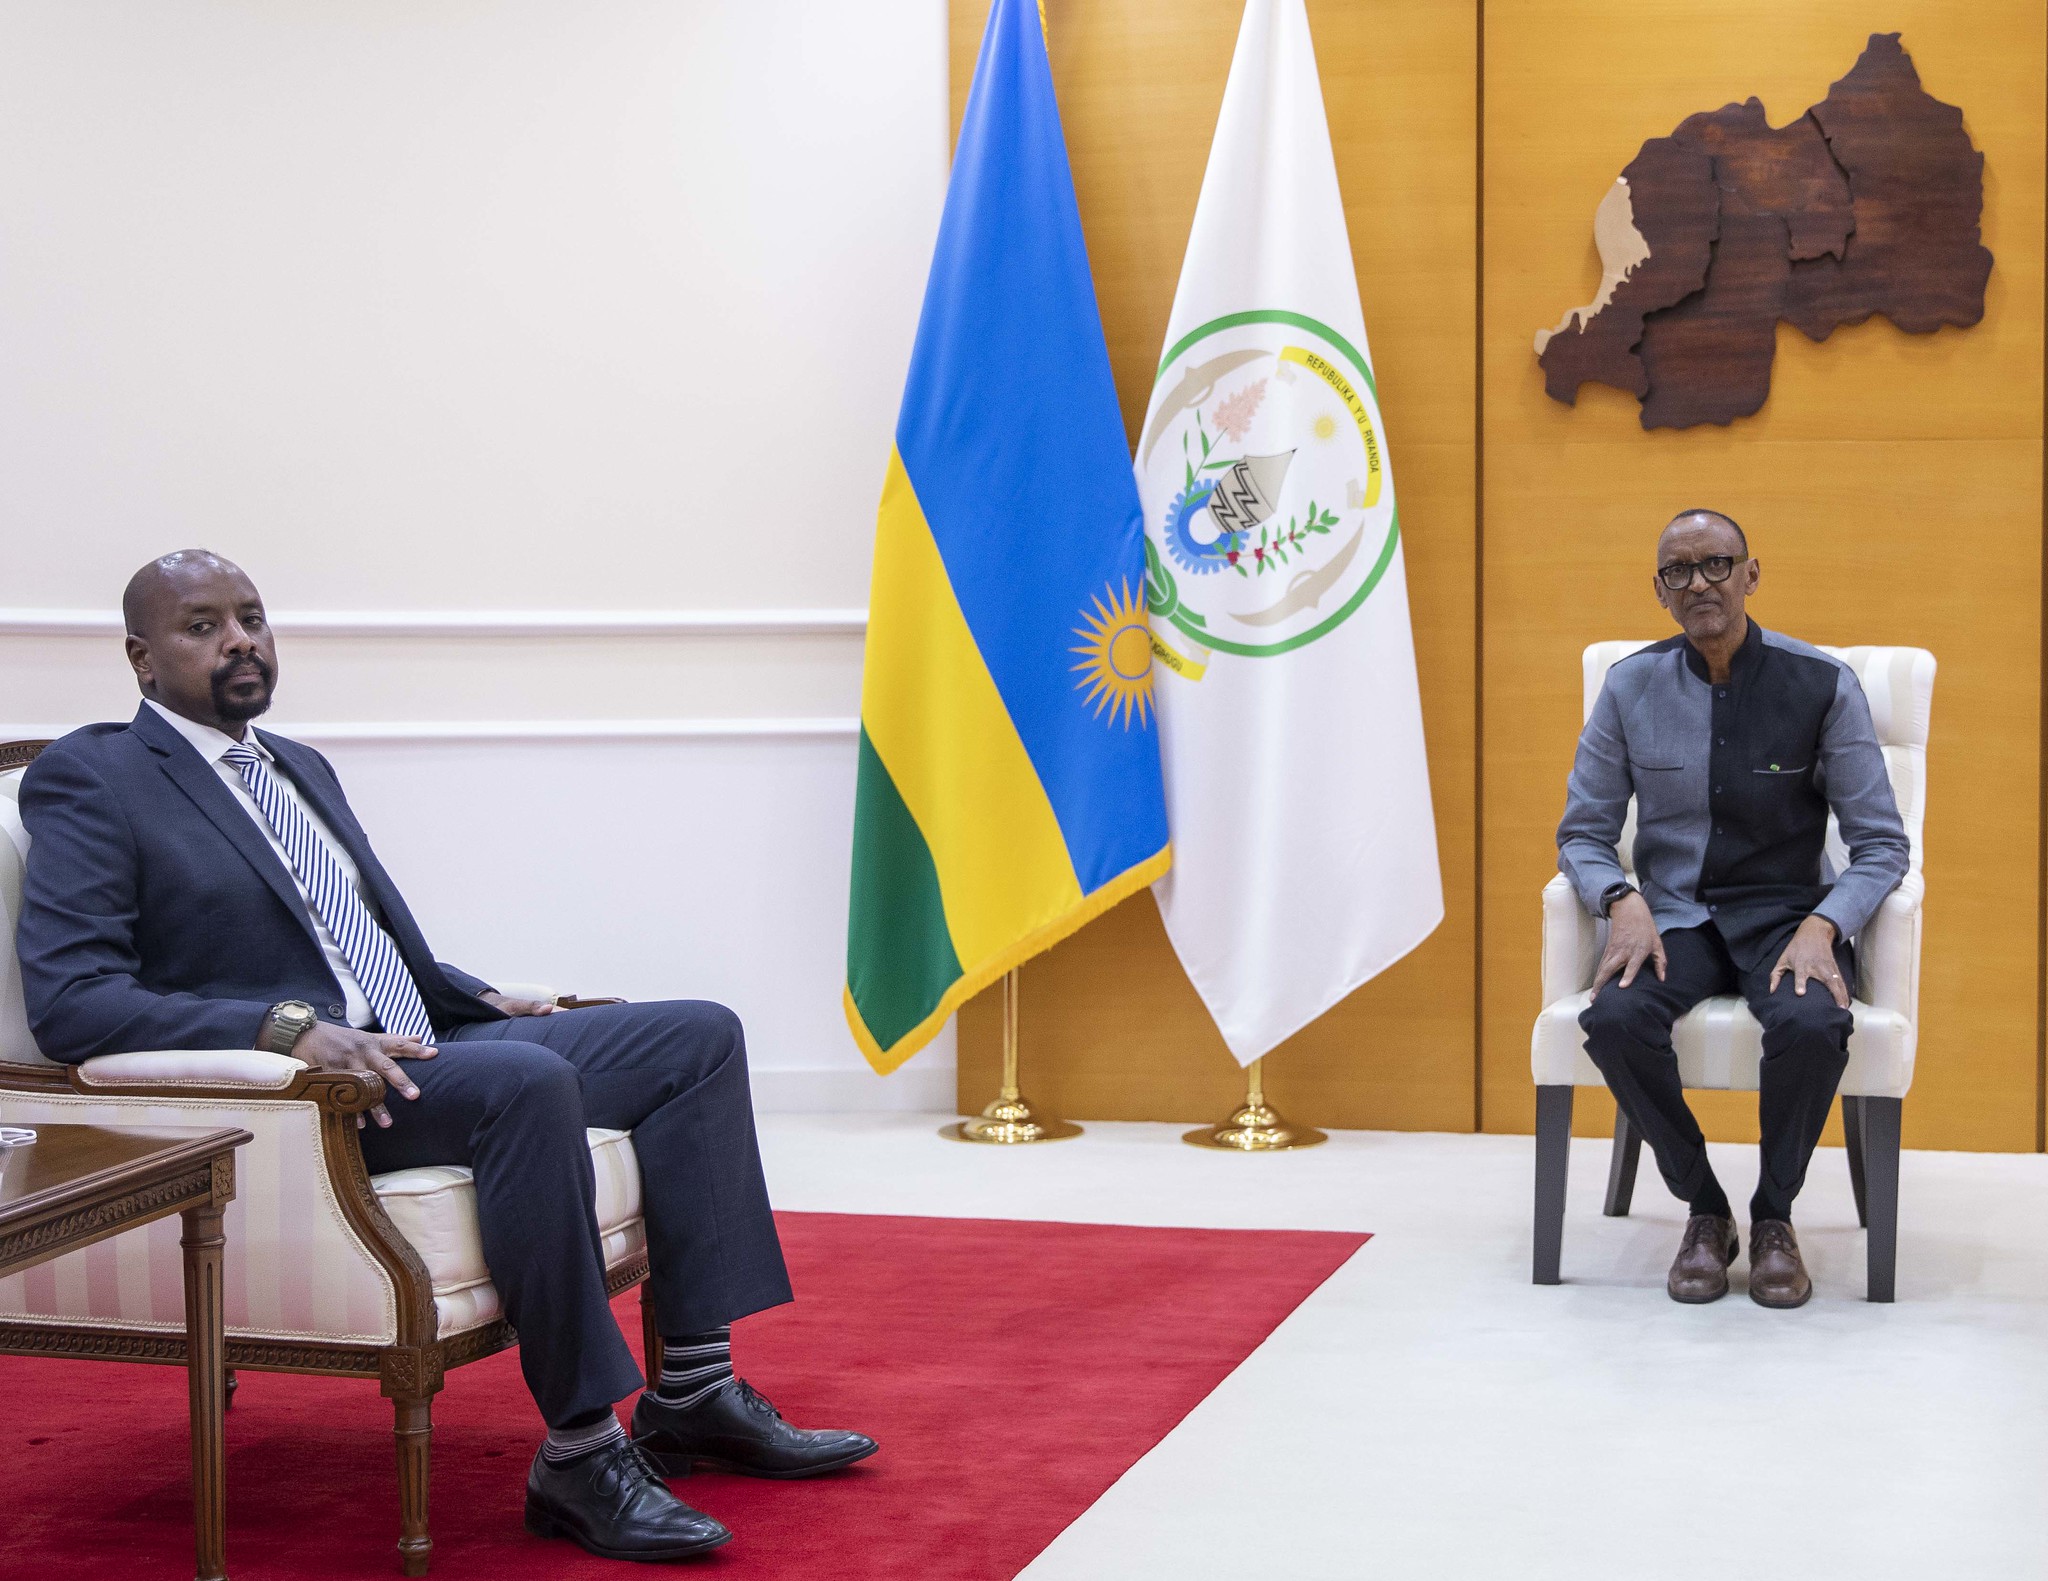 General Muhoozi Kainerugaba, Senior Presidential Advisor on Special Operations and former Commander of UPDF Land Forces and Rwanda president Paul Kagame during his visit of Kigali in March, 2022